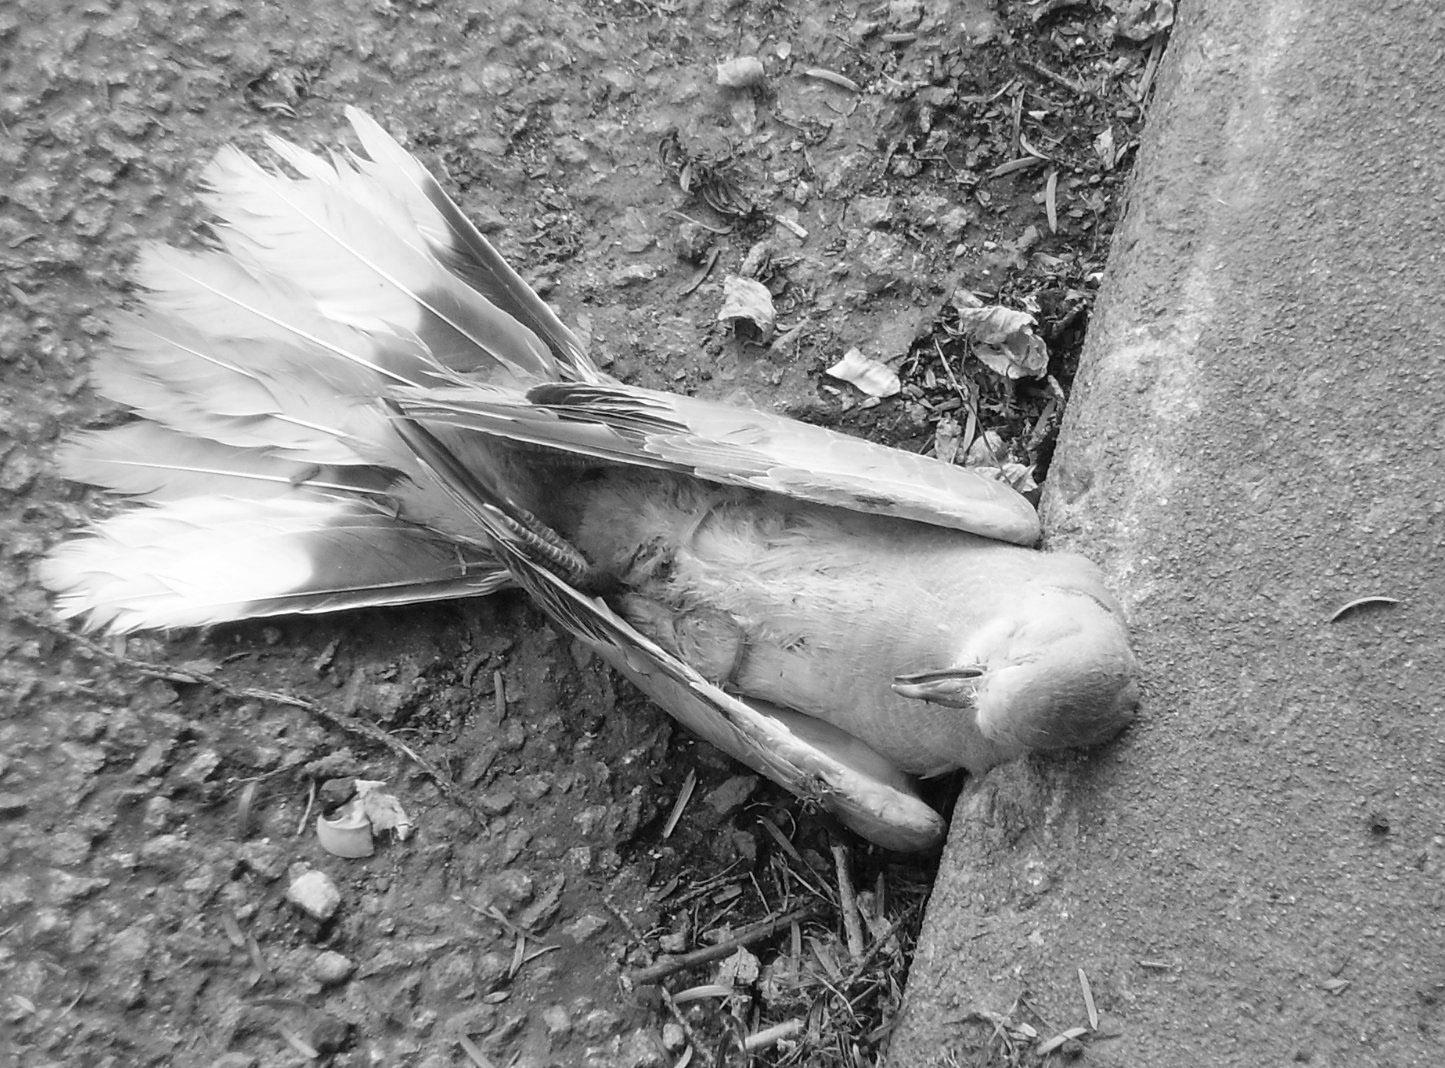 A Dead Pigeon